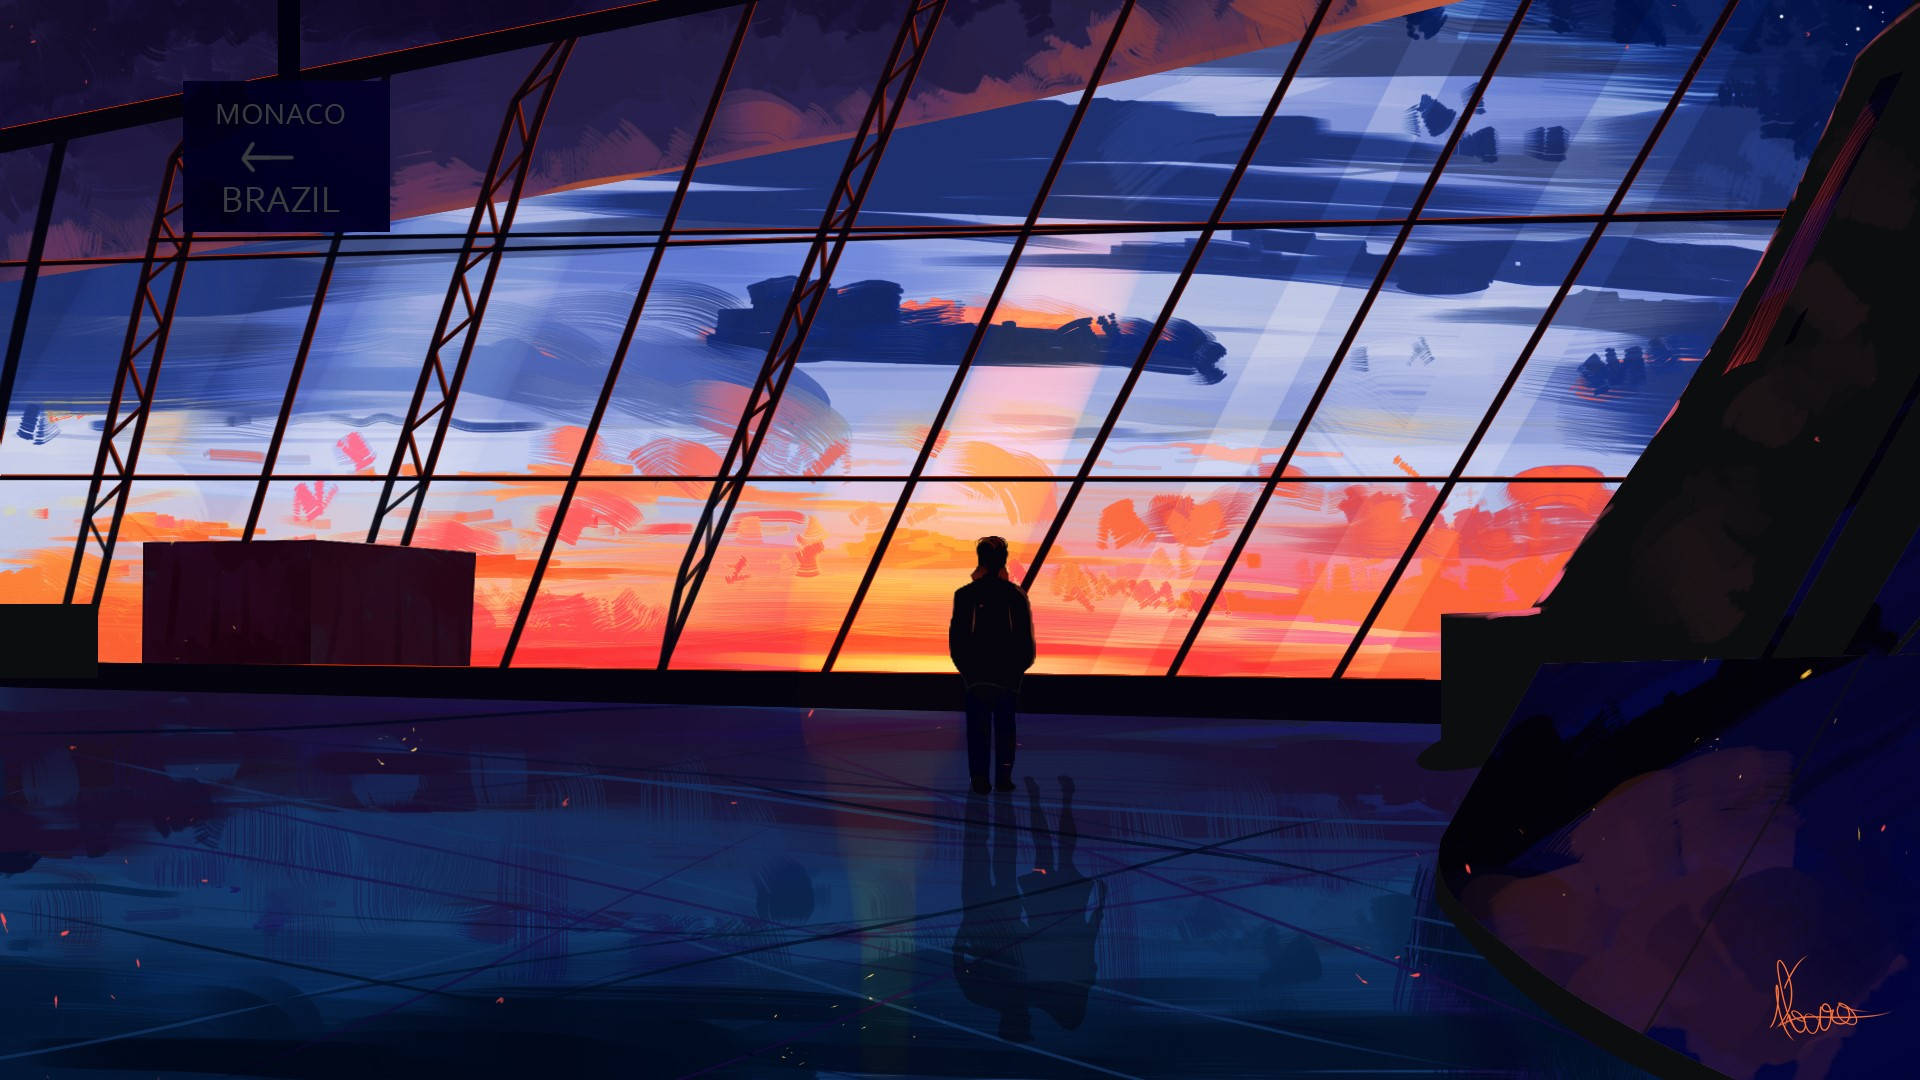 Animated Image Of An Airport Background